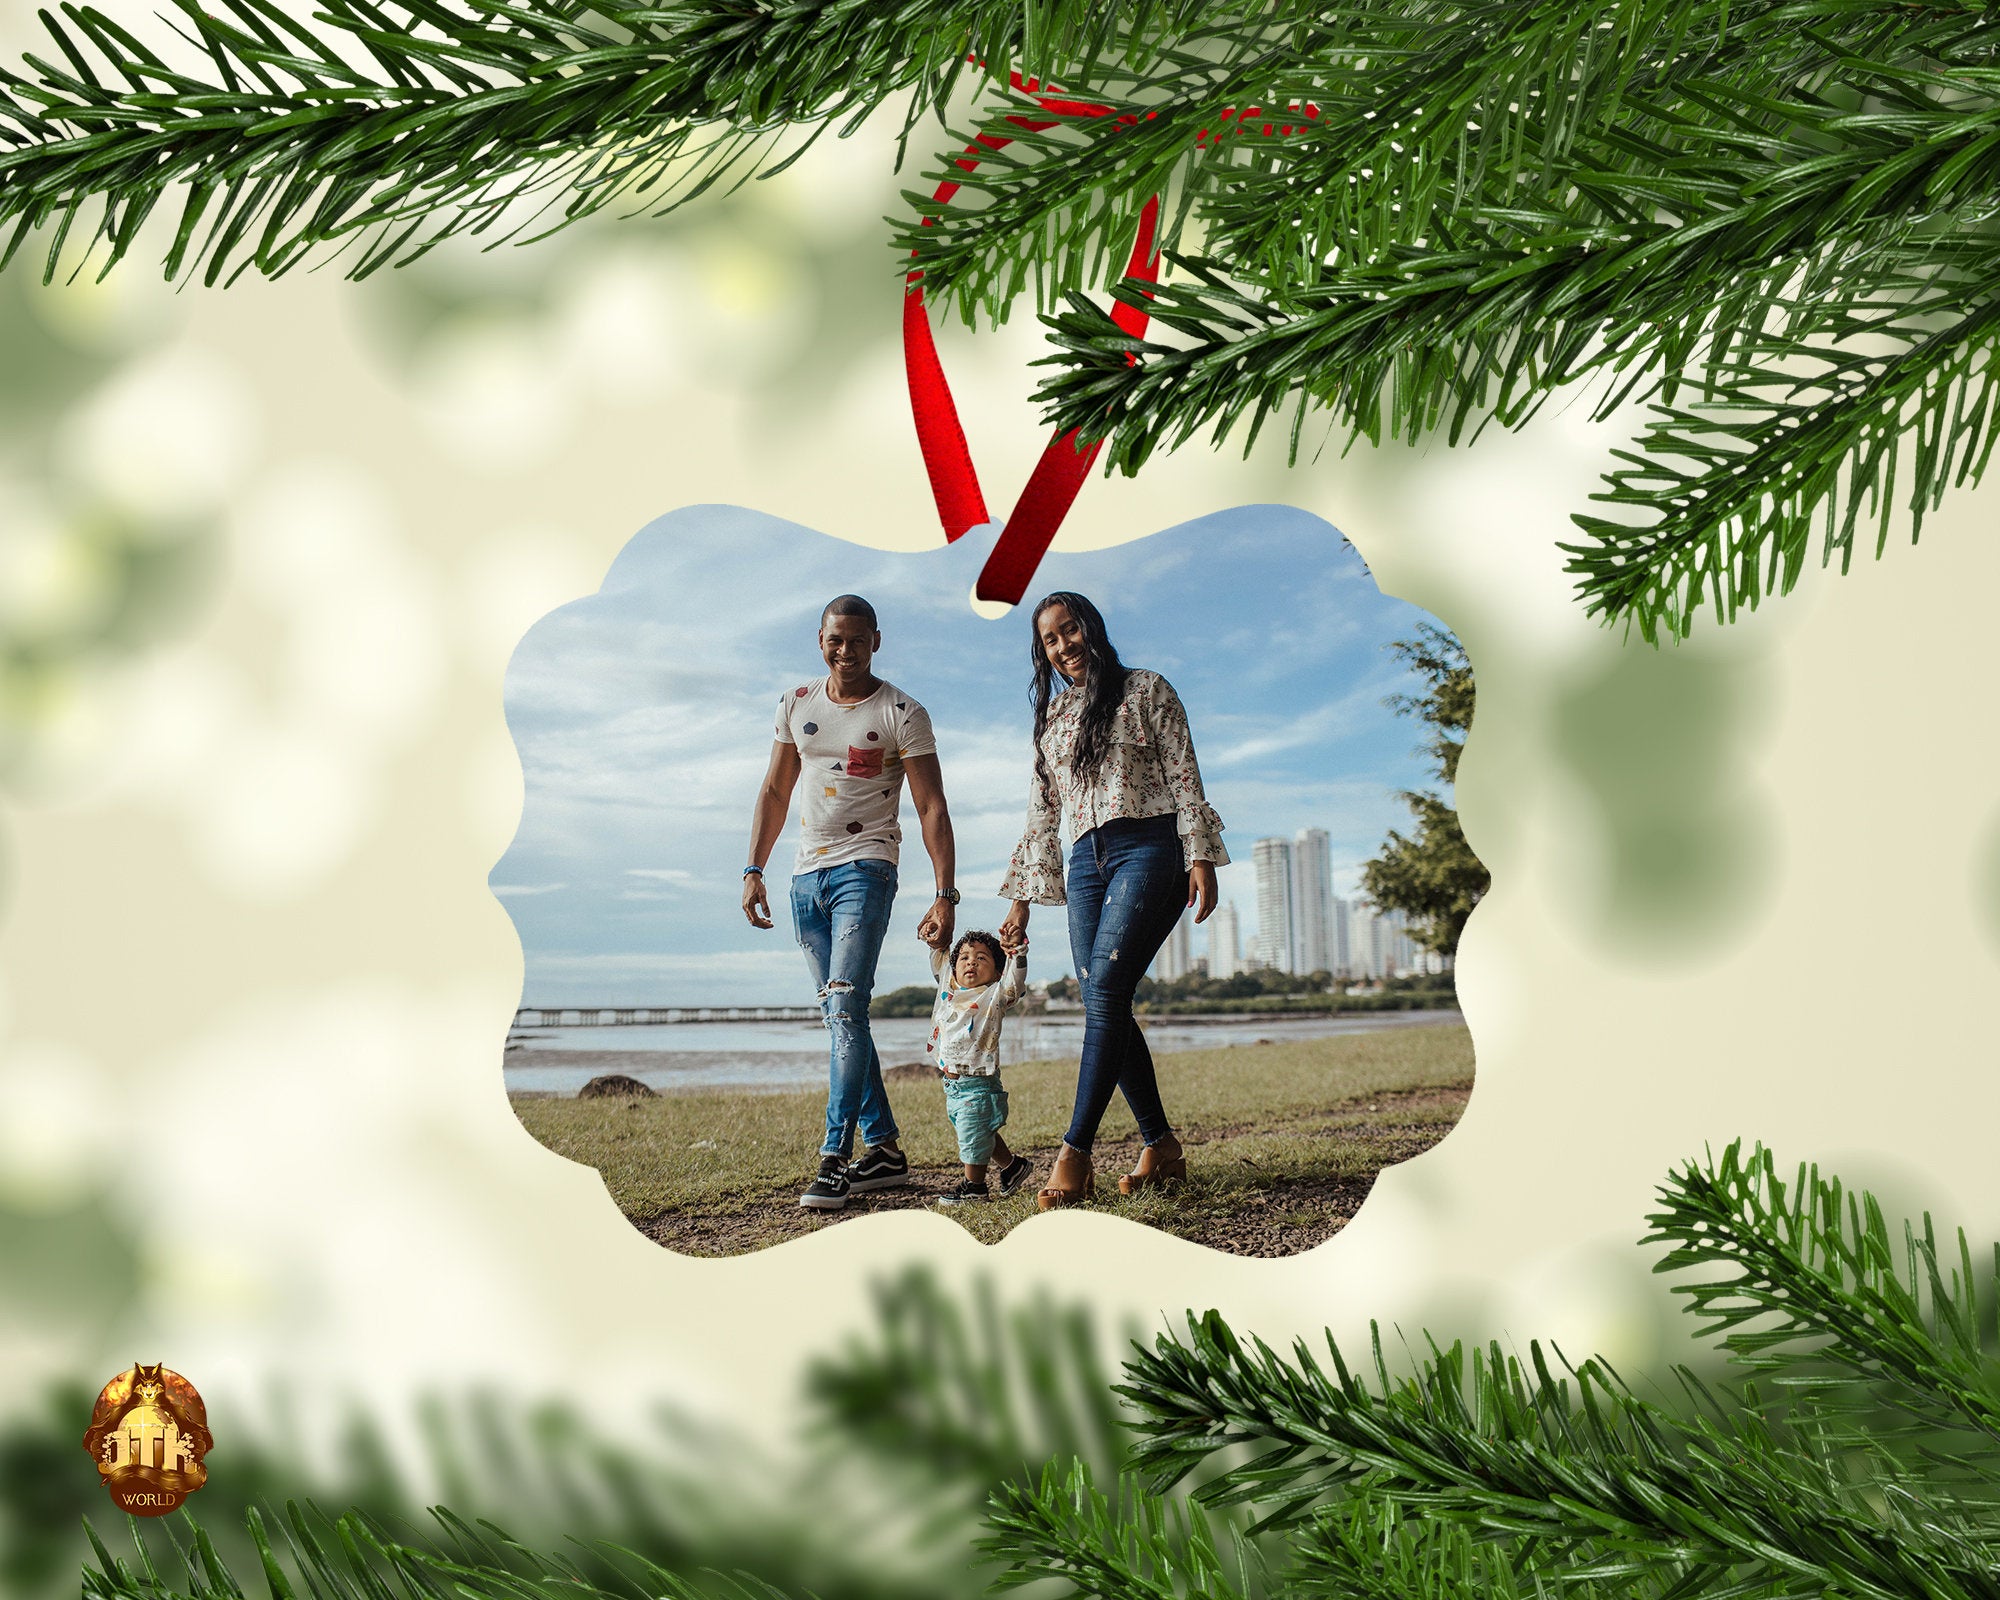 Personalized Christmas Benelux Wood Ornament - Photo Wood Merry Christmas Ornament - Custom Photo Wood Ornament - Add Your Own Photo & Text